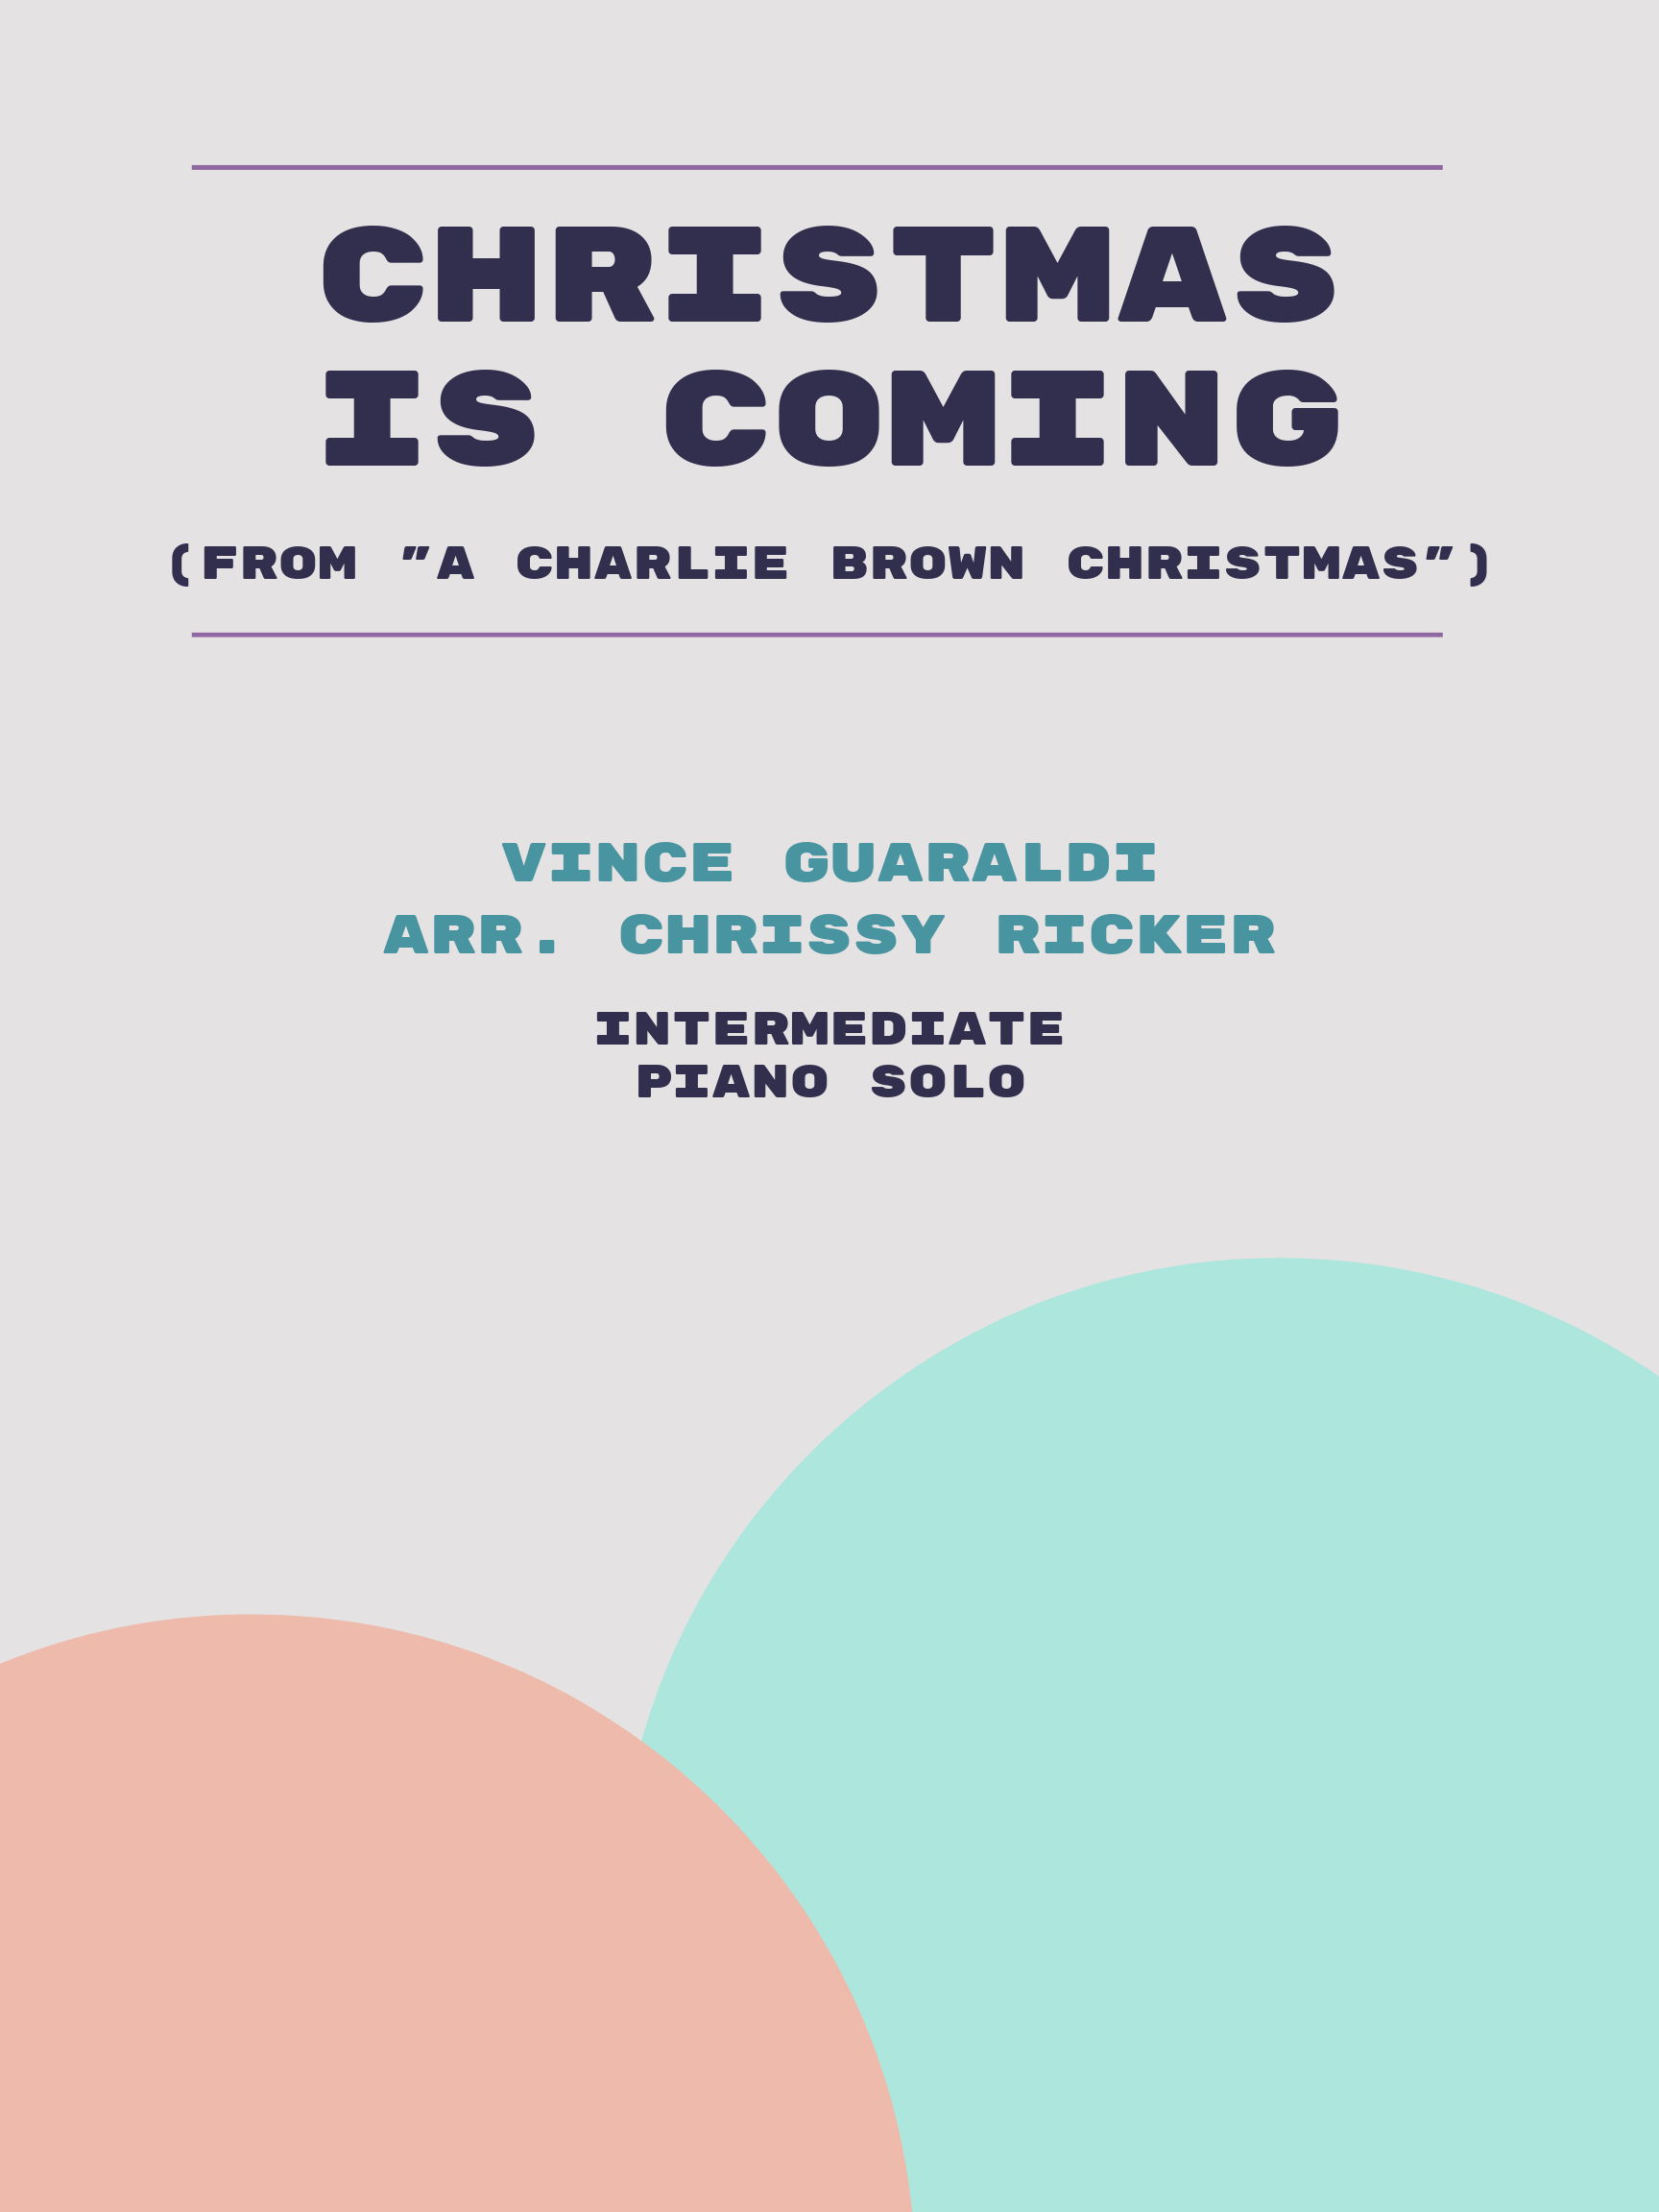 Christmas is Coming by Vince Guaraldi